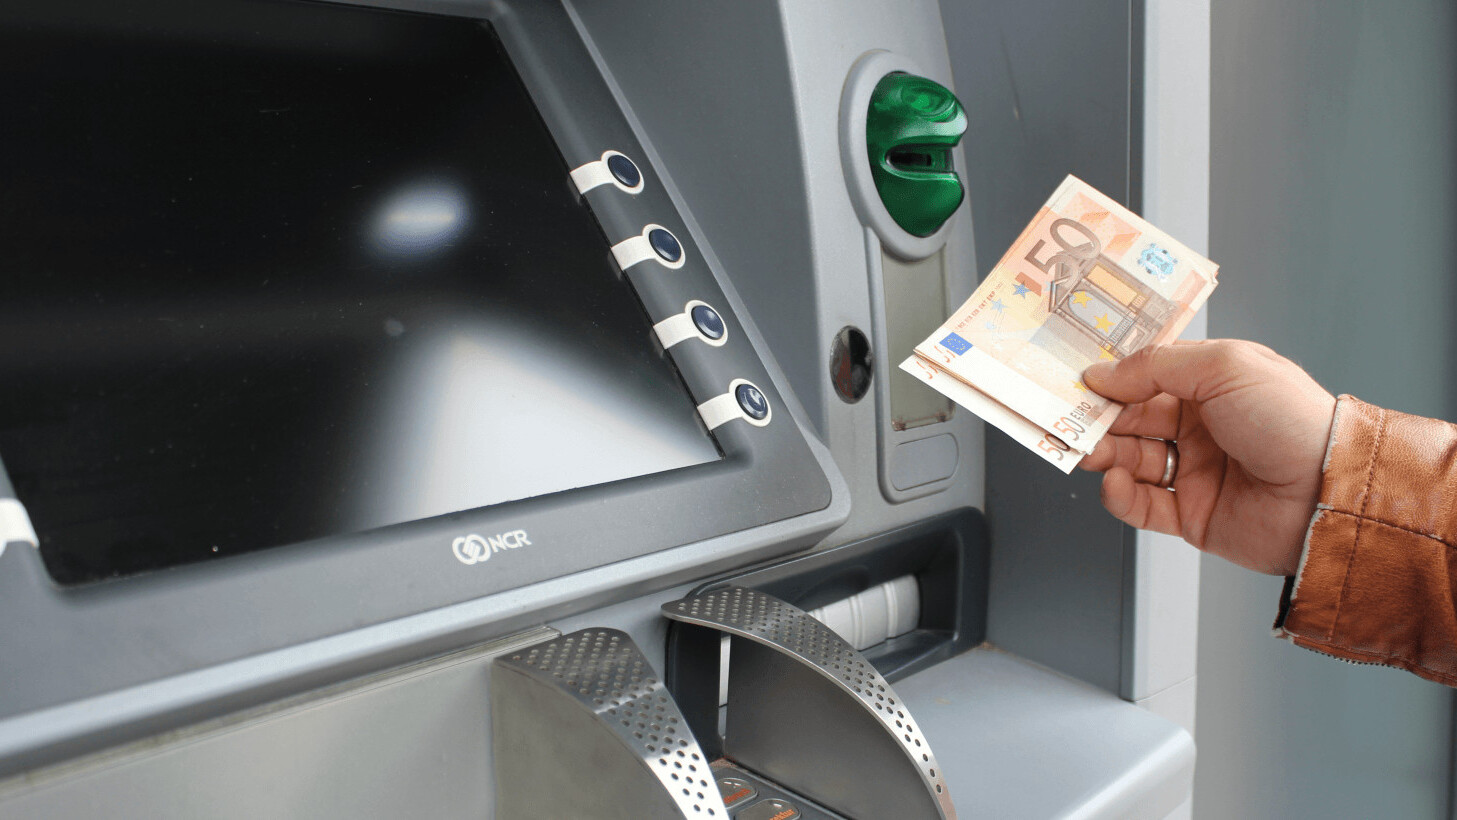 FBI warns of massive ATM scam that could affect banks worldwide